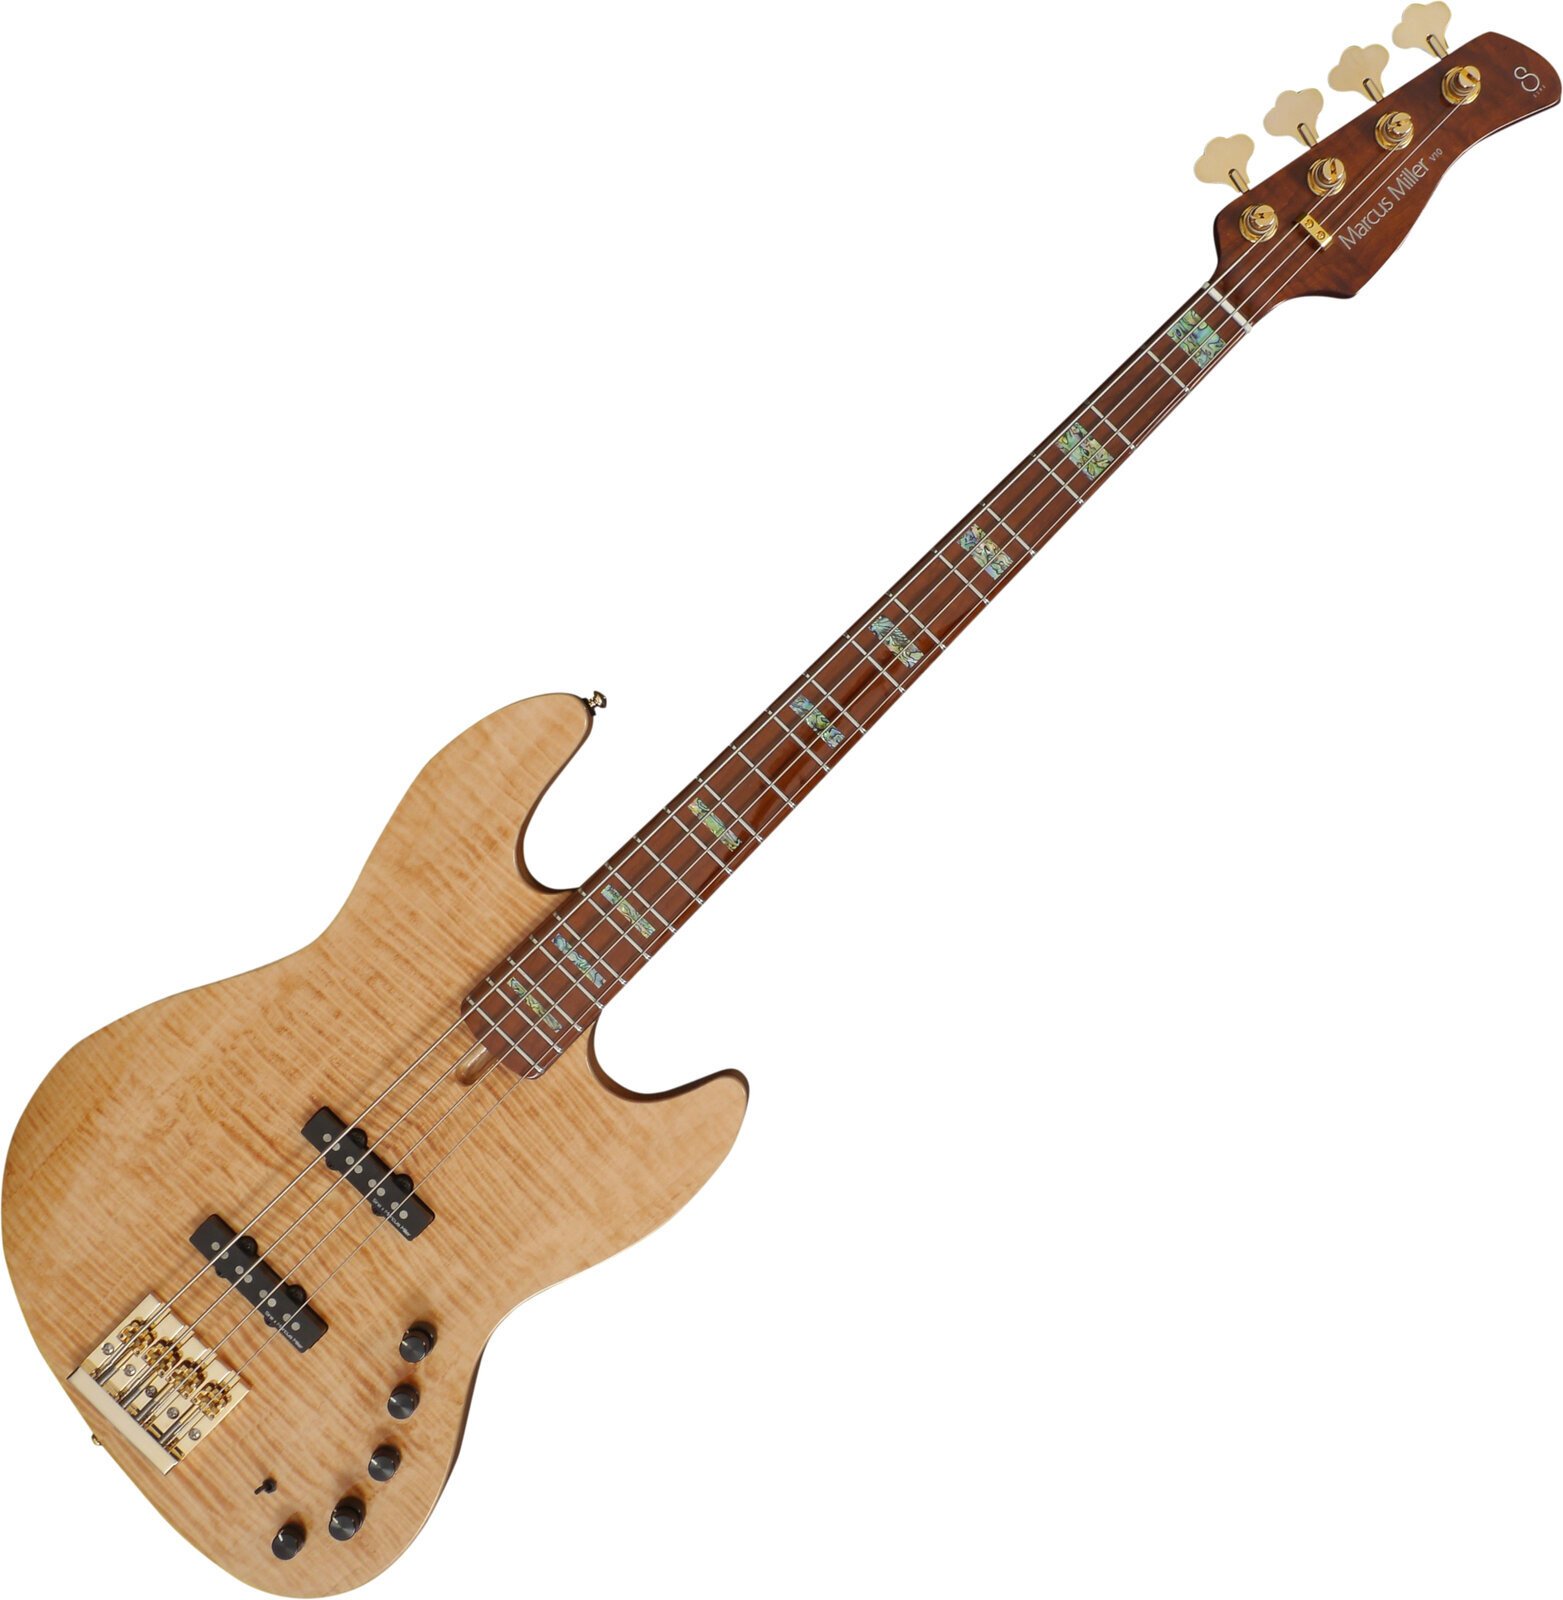 Basso Elettrico Sire Marcus Miller V10 DX-4 Natural